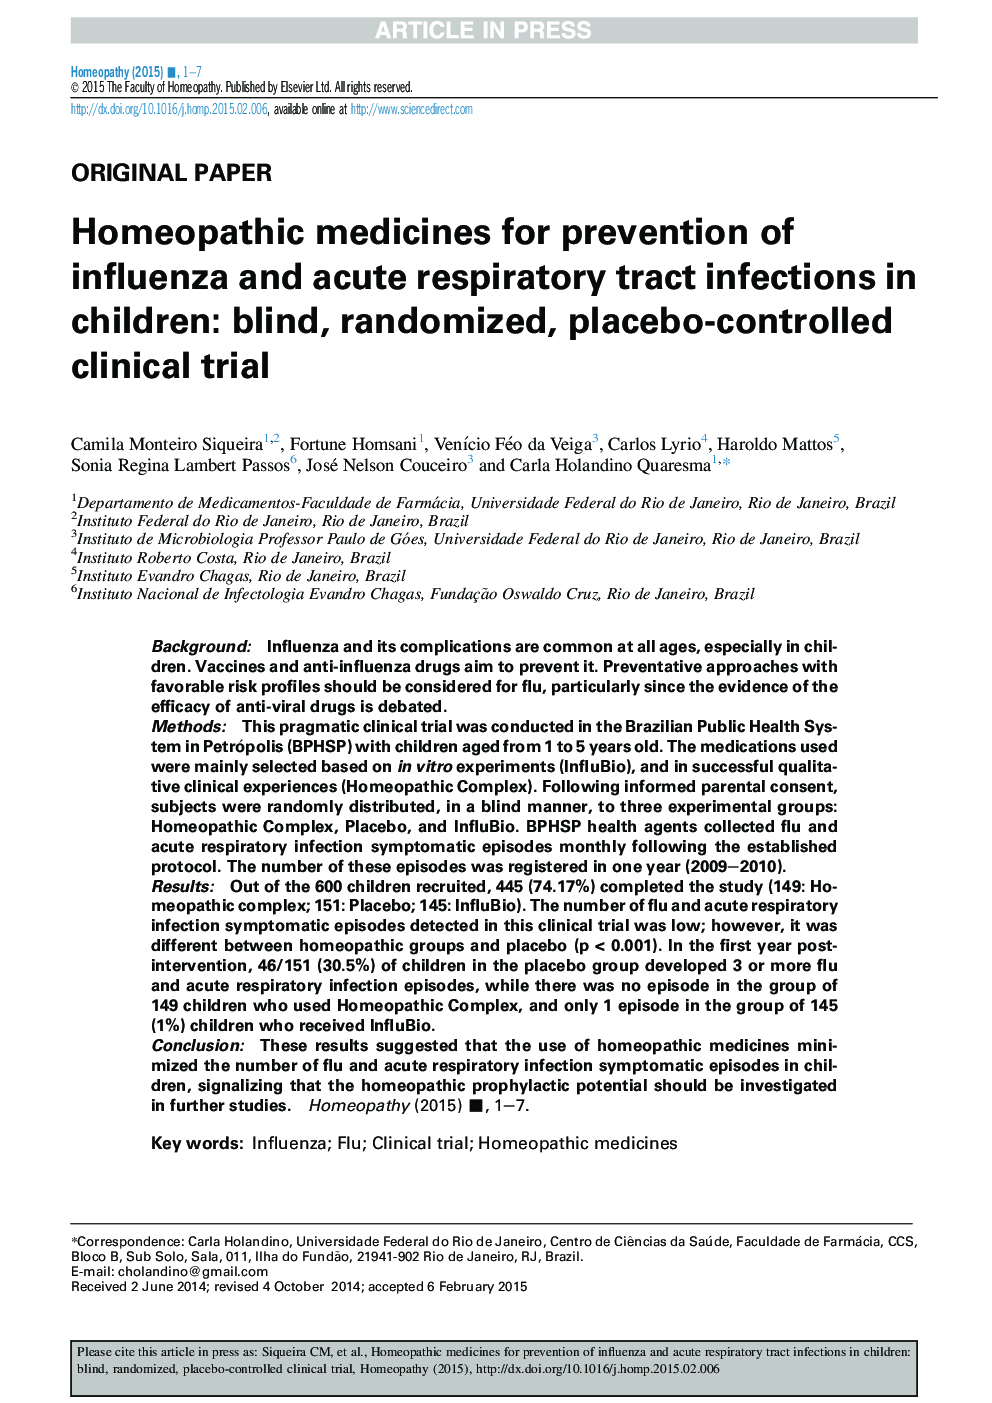 Homeopathic medicines for prevention of influenza and acute respiratory tract infections in children: blind, randomized, placebo-controlled clinical trial